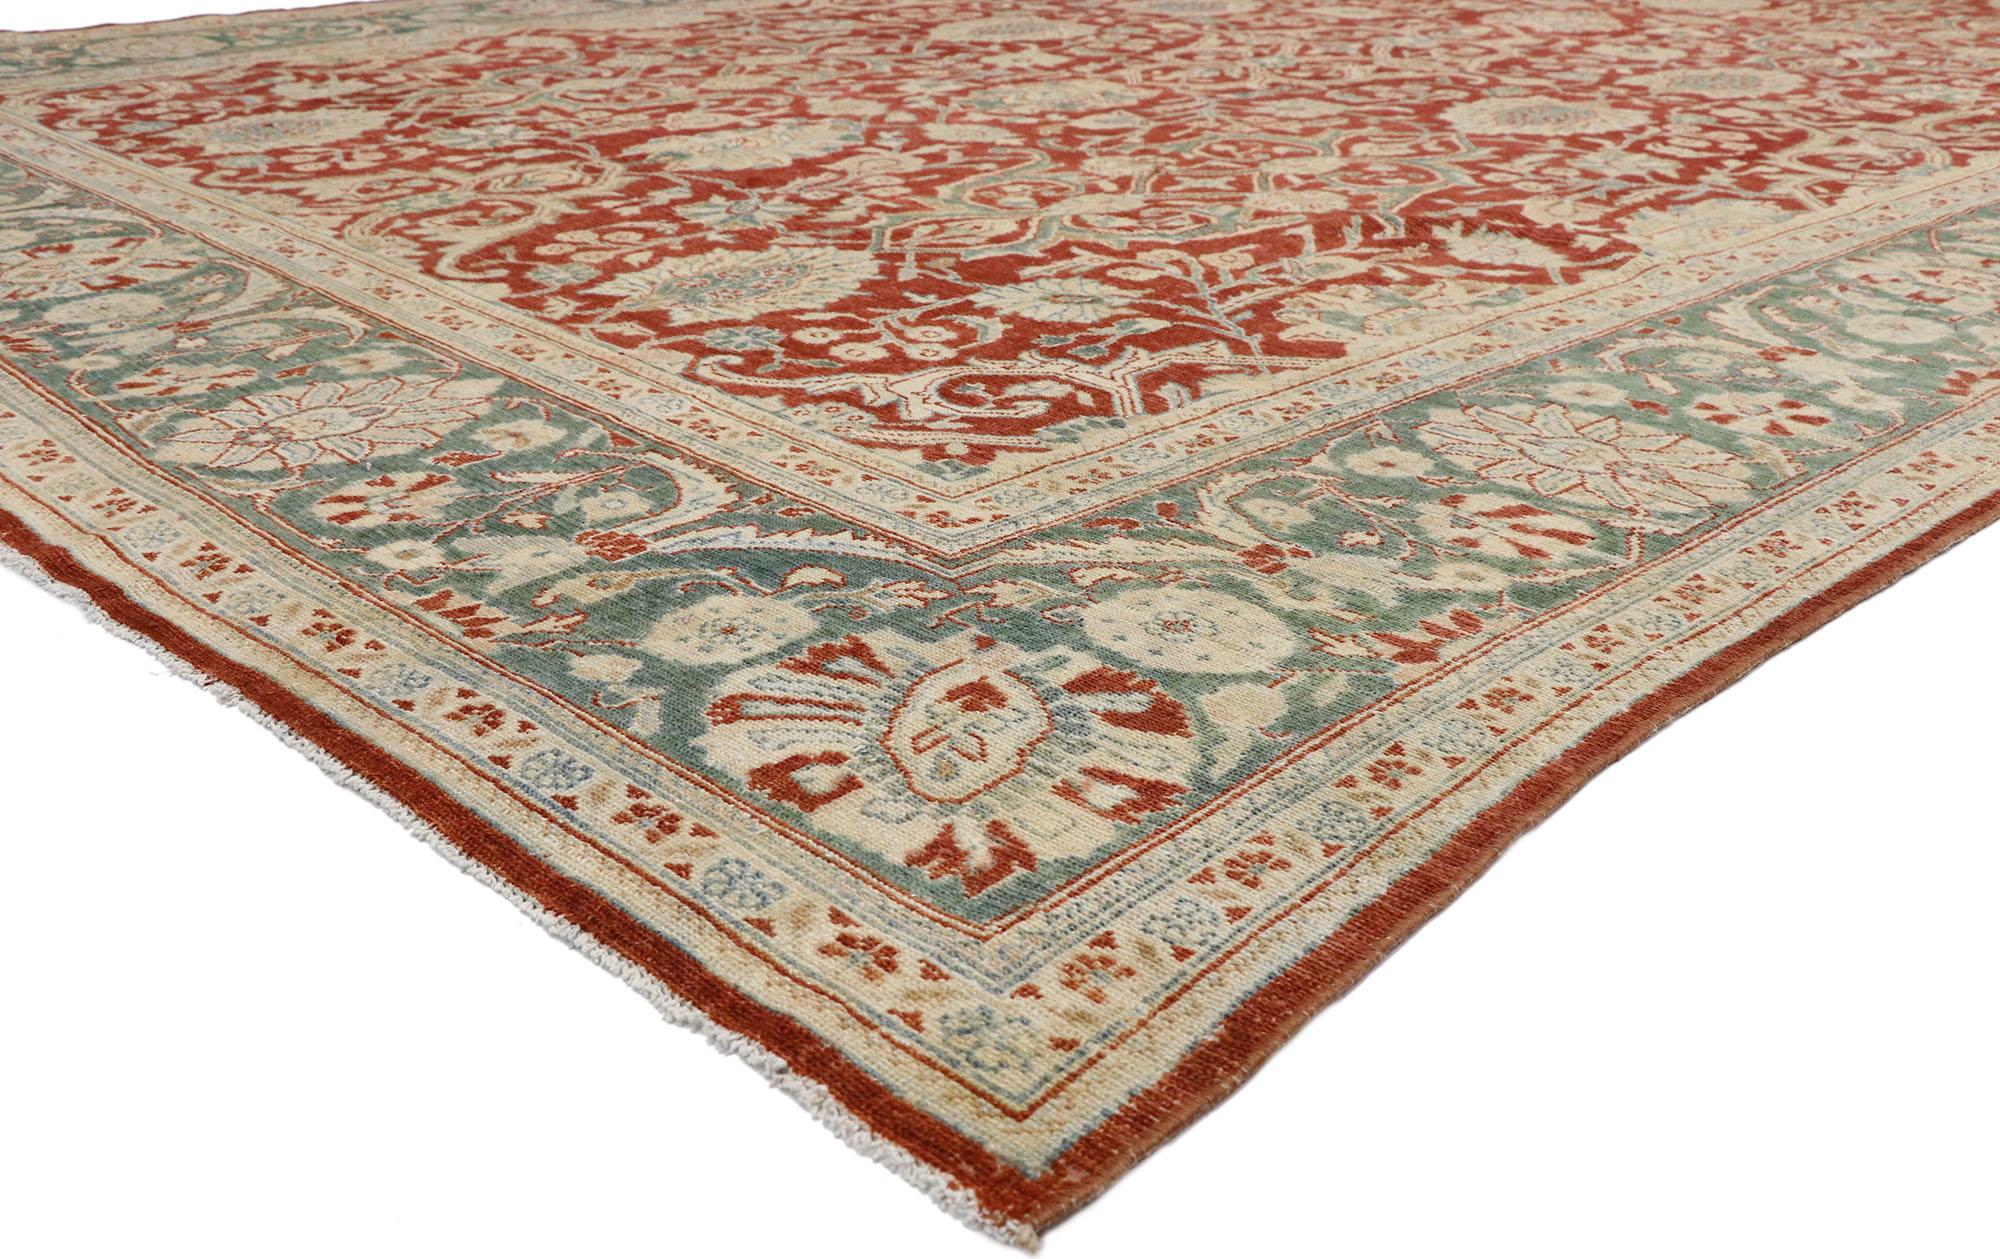 52680, distressed antique Persian Mahal design rug with English Manor Chintz style. With a traditional feel and Classic floral pattern, this hand knotted wool distressed antique Persian Mahal design rug beautifully embodies English Chintz style. The